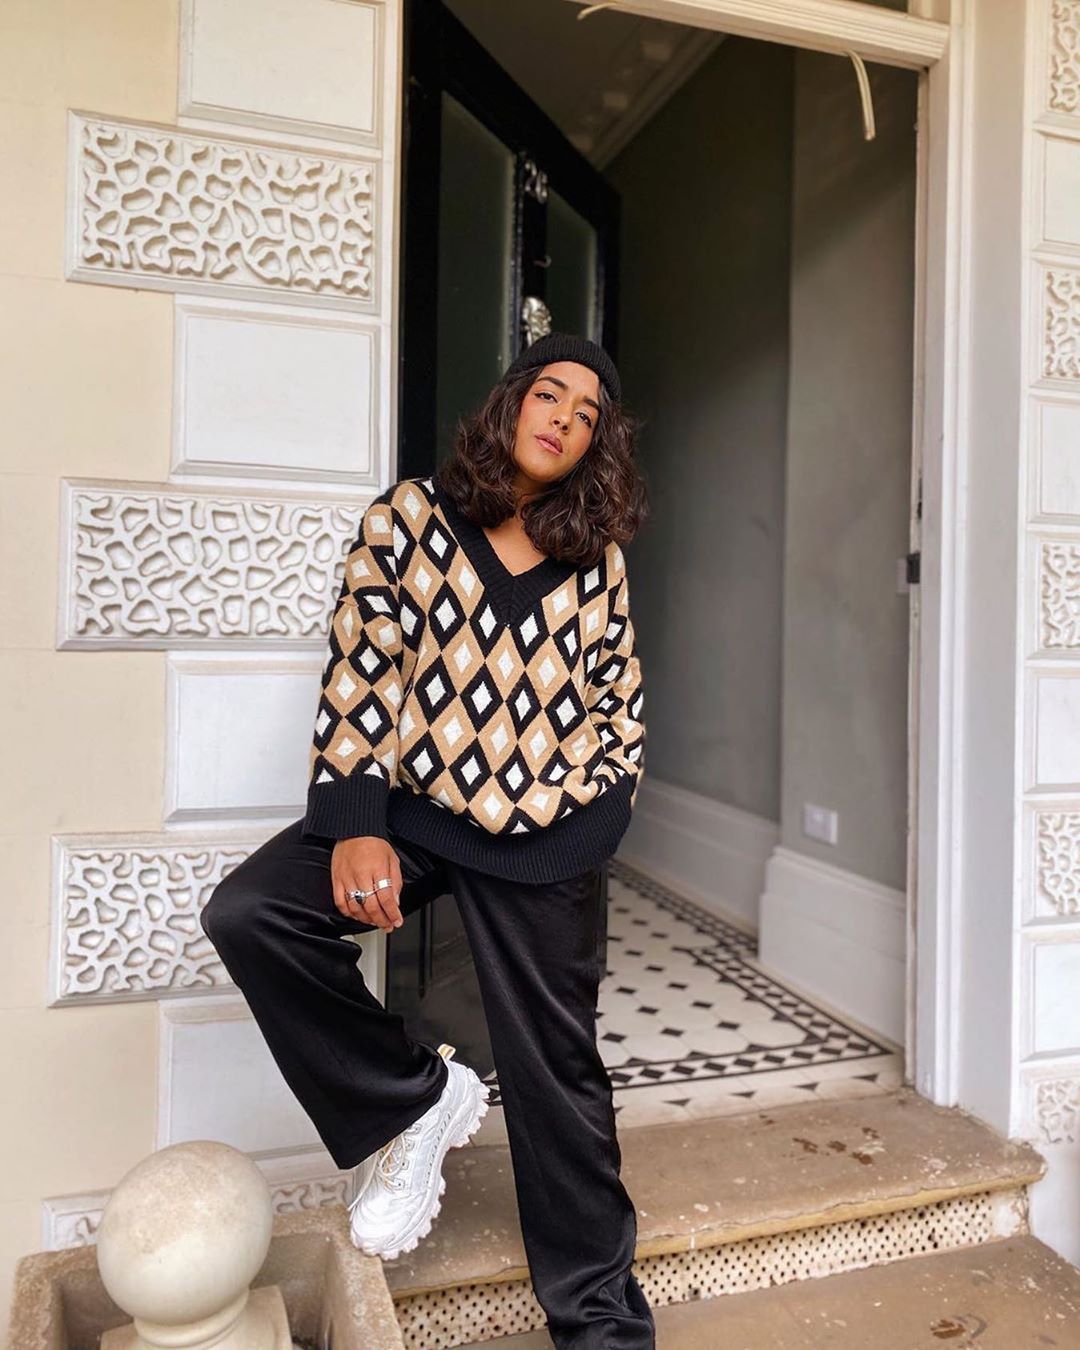 For creator Arooj Aftab (@vogue_wonders), authenticity is everything. “Please always be yourself,” says the 23-year-old. “You have your own message, your own story and your own goals, so please do it YOUR way with your authentic voice.”⁣
⁣
“Oversized fits and menswear are what I’m about. It’s how I’m able to feel confident within myself whilst dealing with my neurofibromatosis (a genetic condition that causes tumors to grow along nerves). I want to show the community that having a condition, illness or disability does not define you and your capabilities.”⁣
⁣
To learn more about Arooj, head to @creators — the place to learn more about what it takes to be a creator from the team at Instagram, and the amazing creators who inspire us every day. ⚡️⁣
⁣
Photo of @vogue_wonders by @chloedoescreative